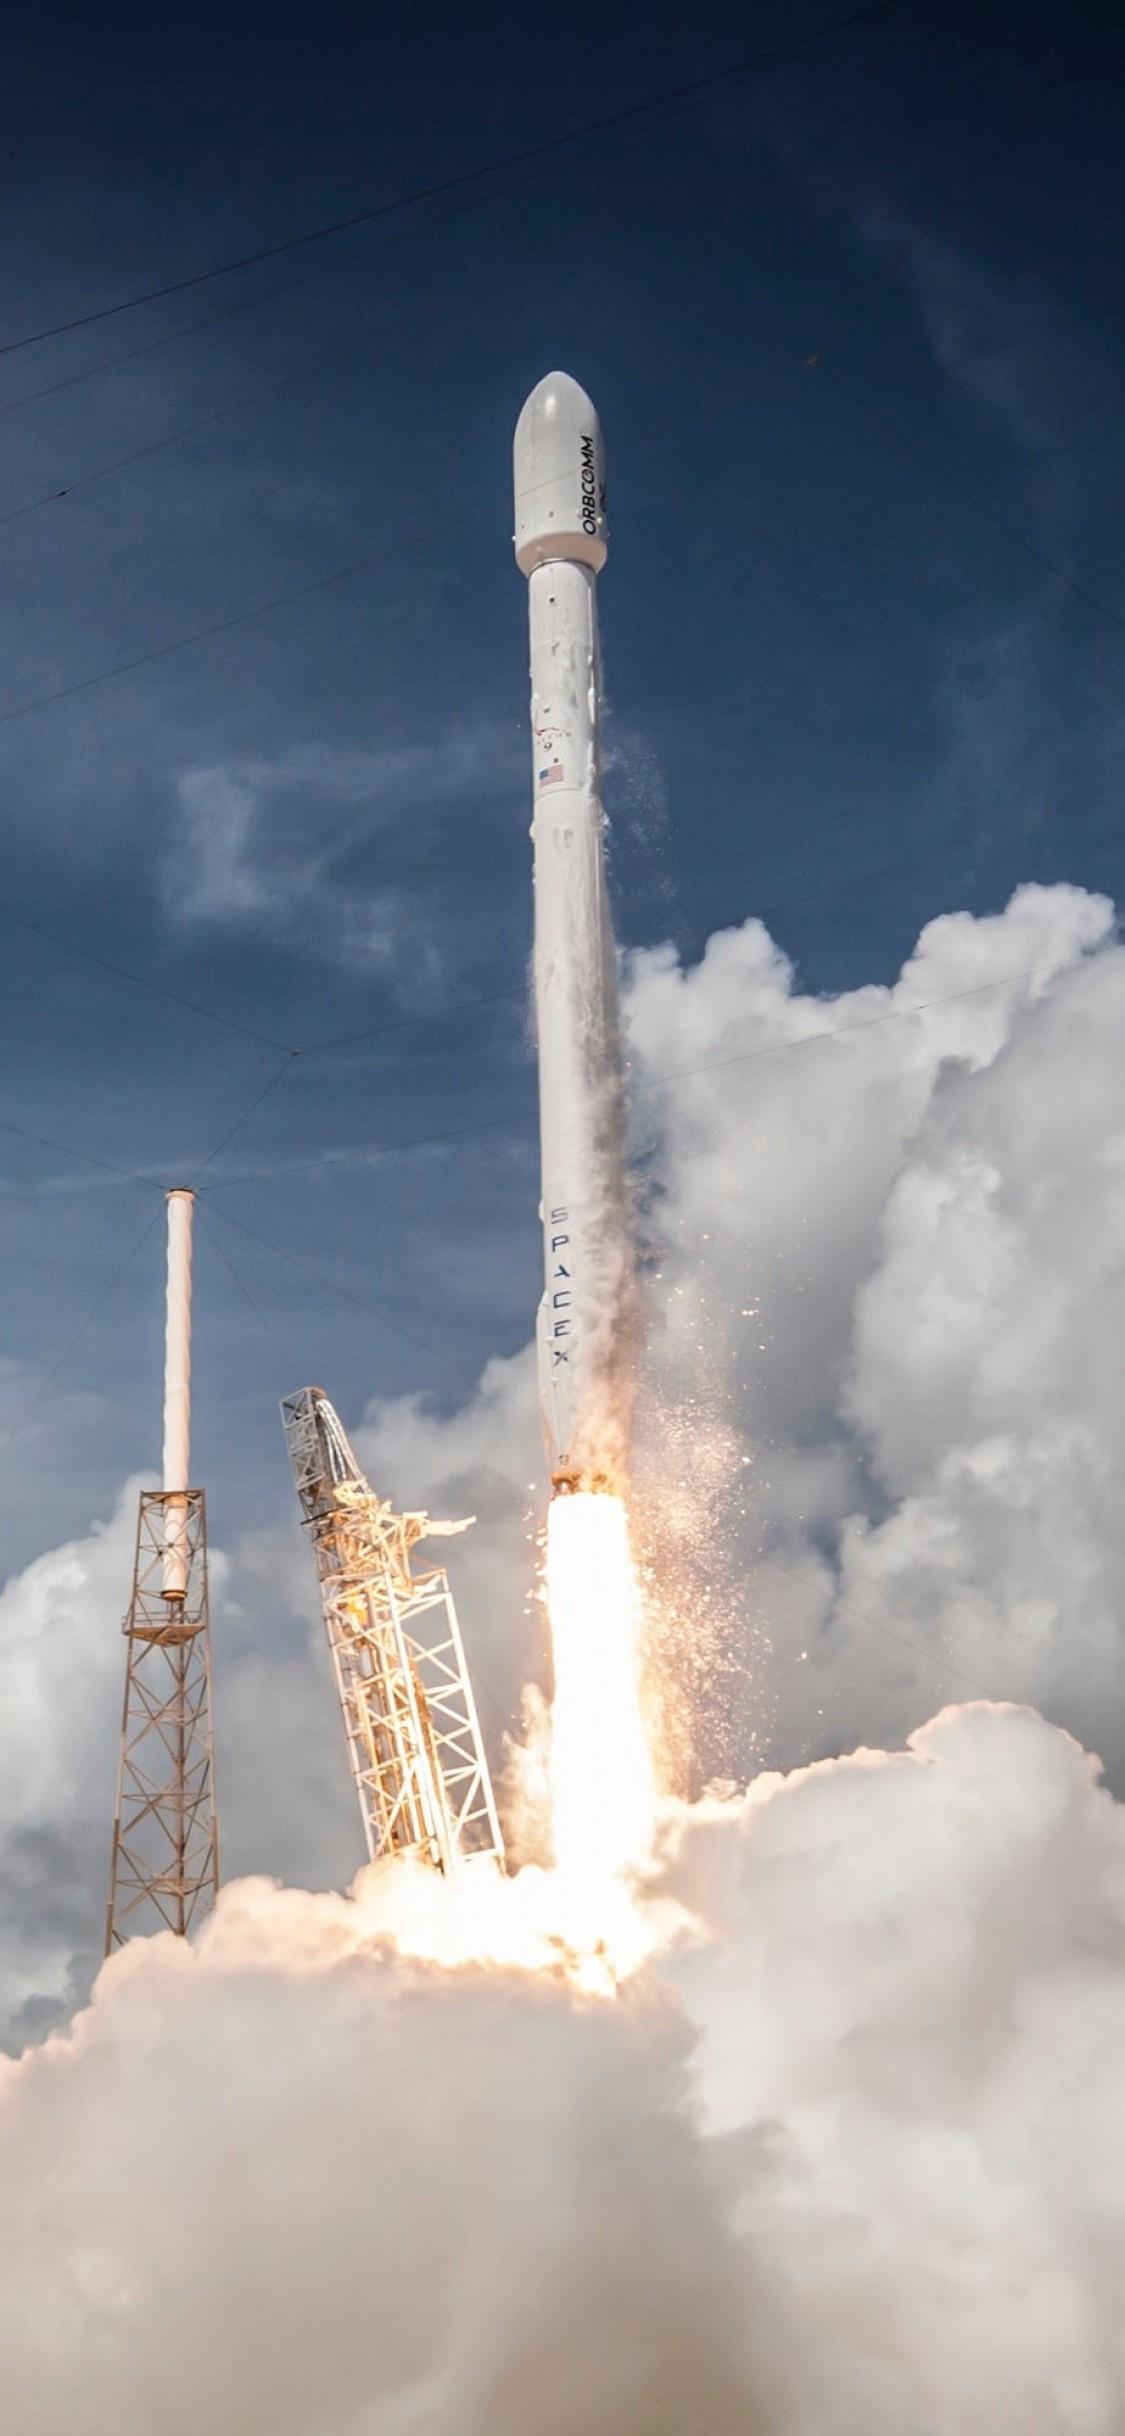 SpaceX iPhone X Wallpaper Download